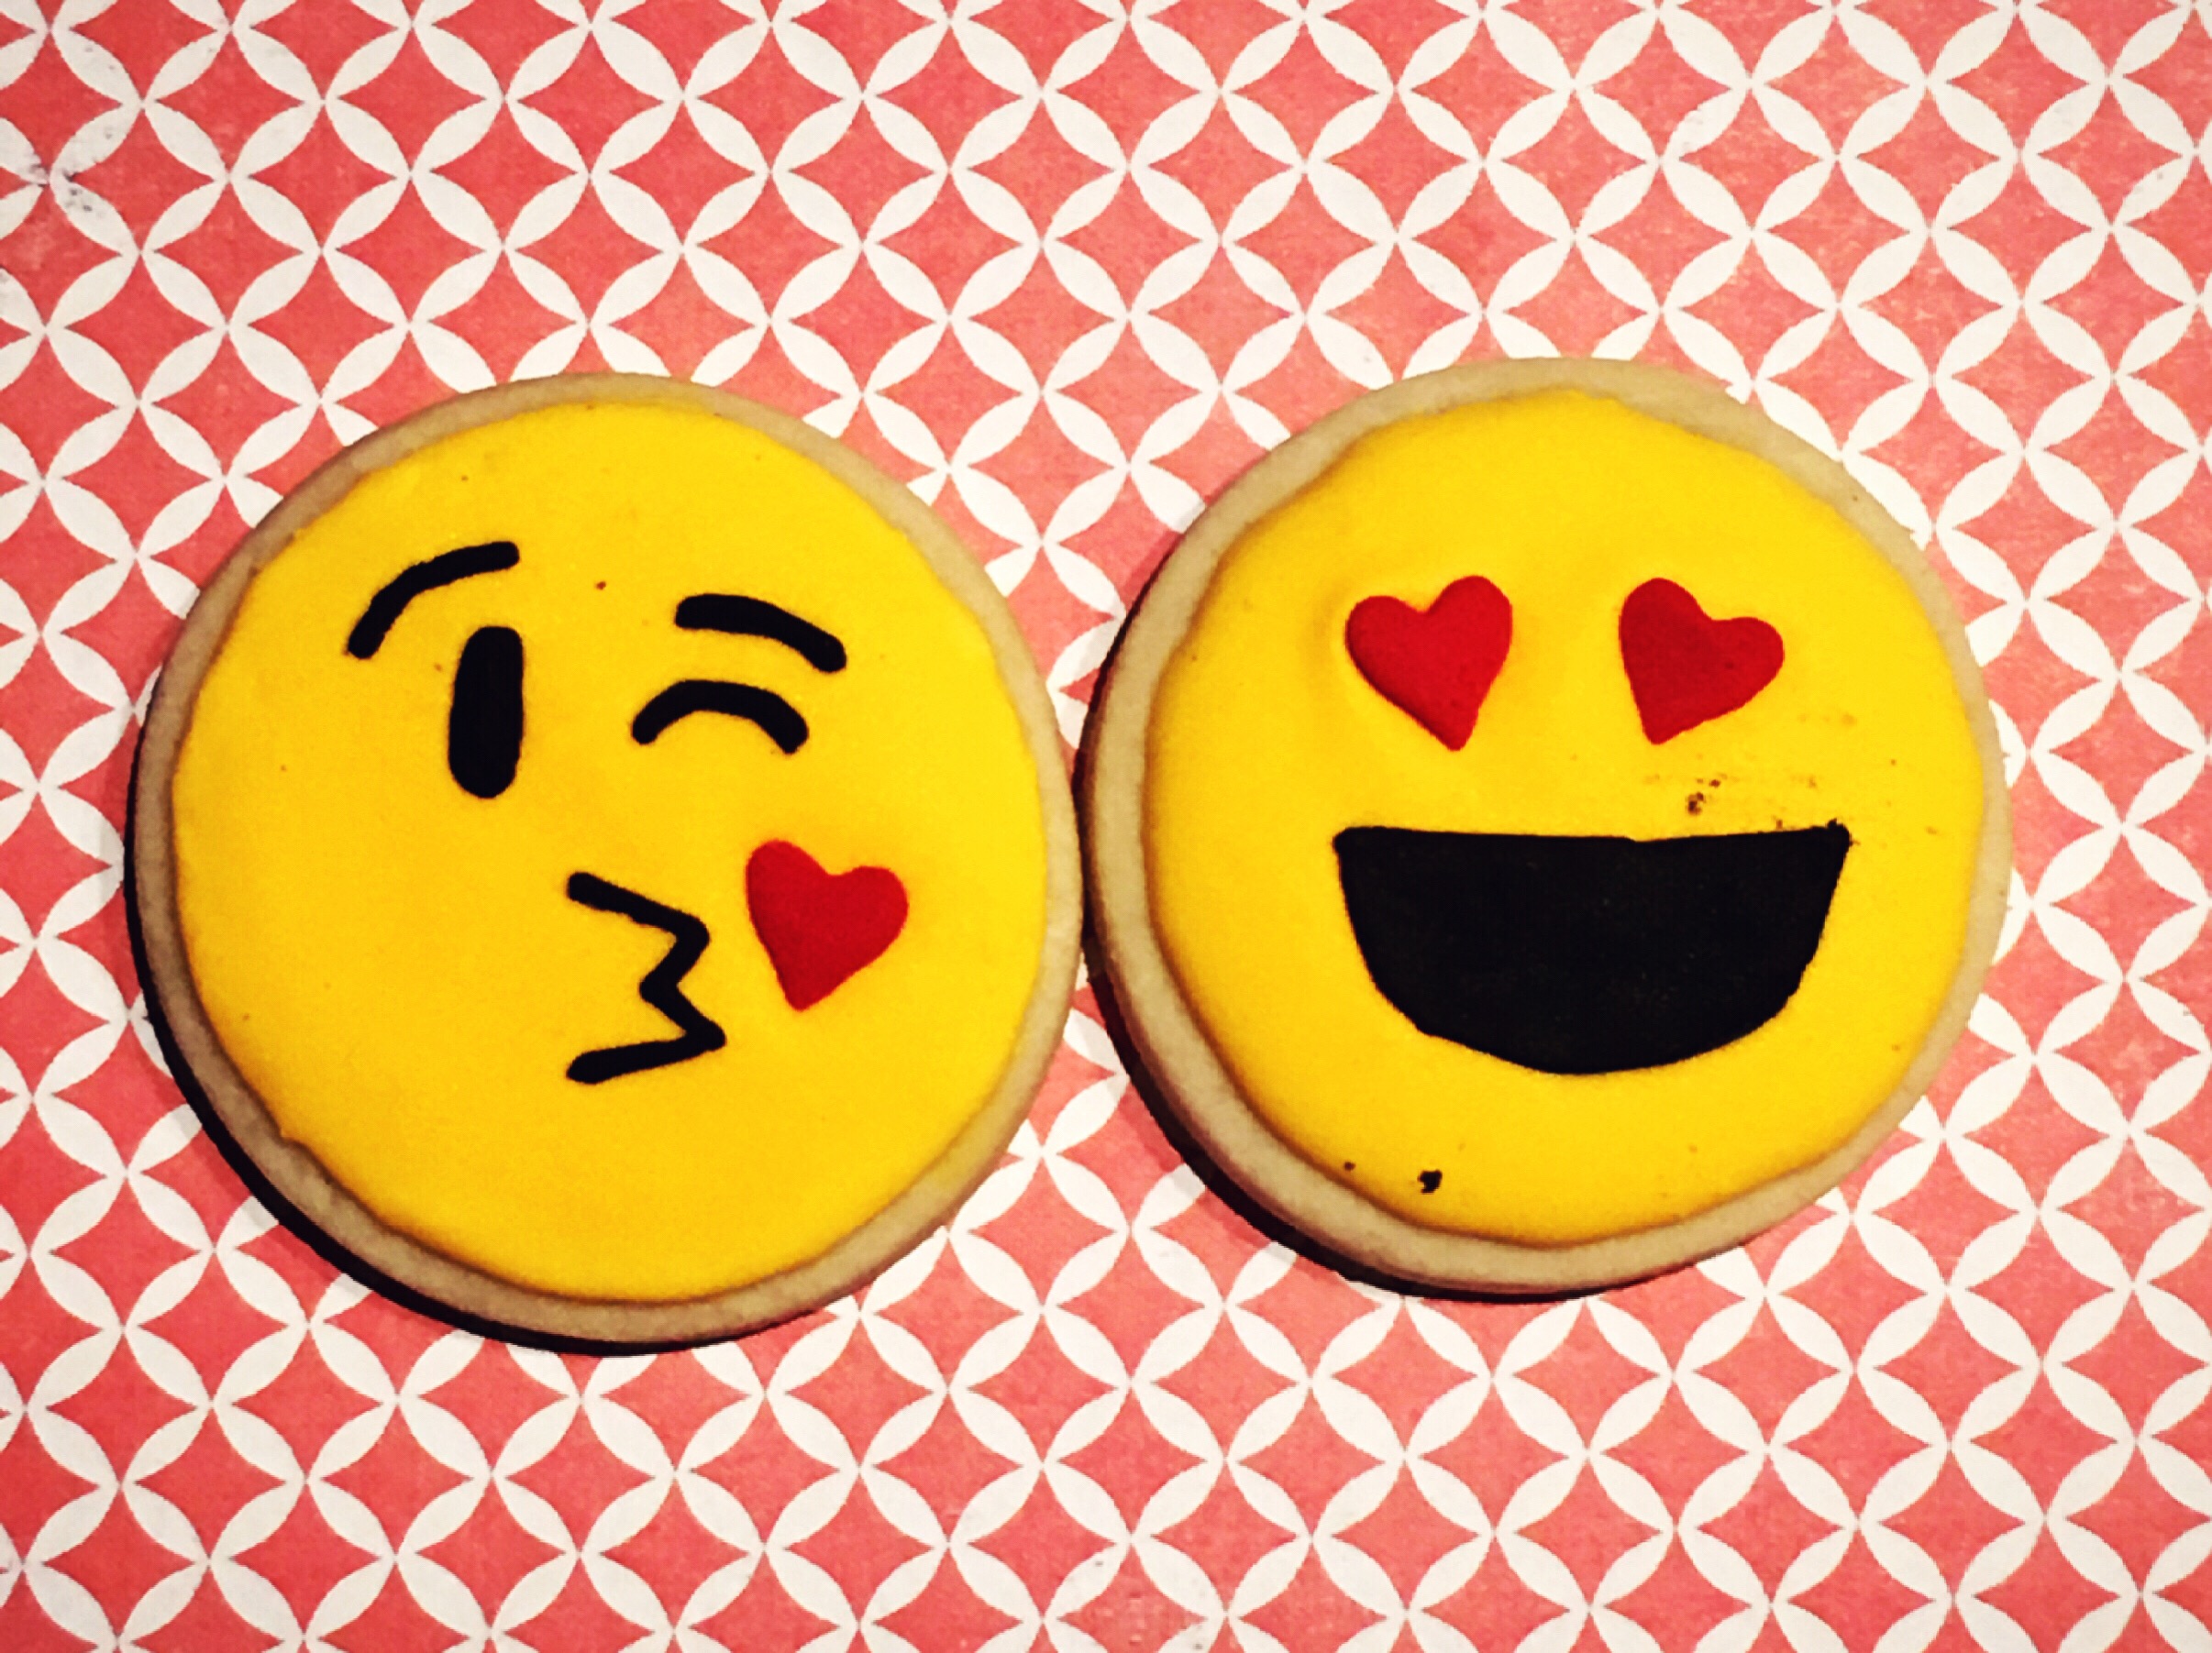 Who knew some smiley faces could do so much for your content marketing?